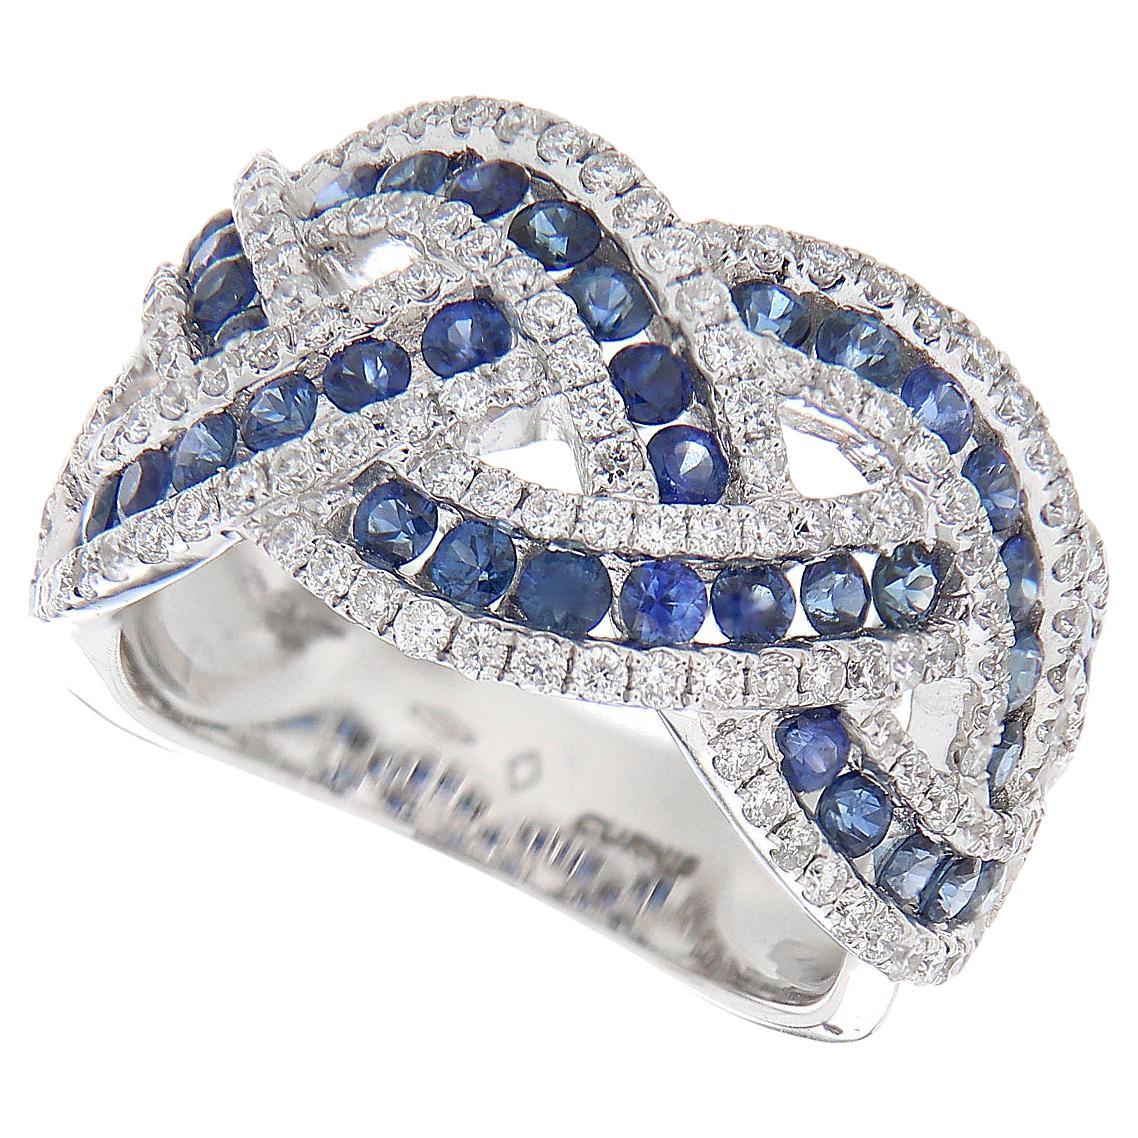 18kt White Gold Band Ring White Diamonds 1.07 Ct Blue Sapphires 1.73 Ct For Sale